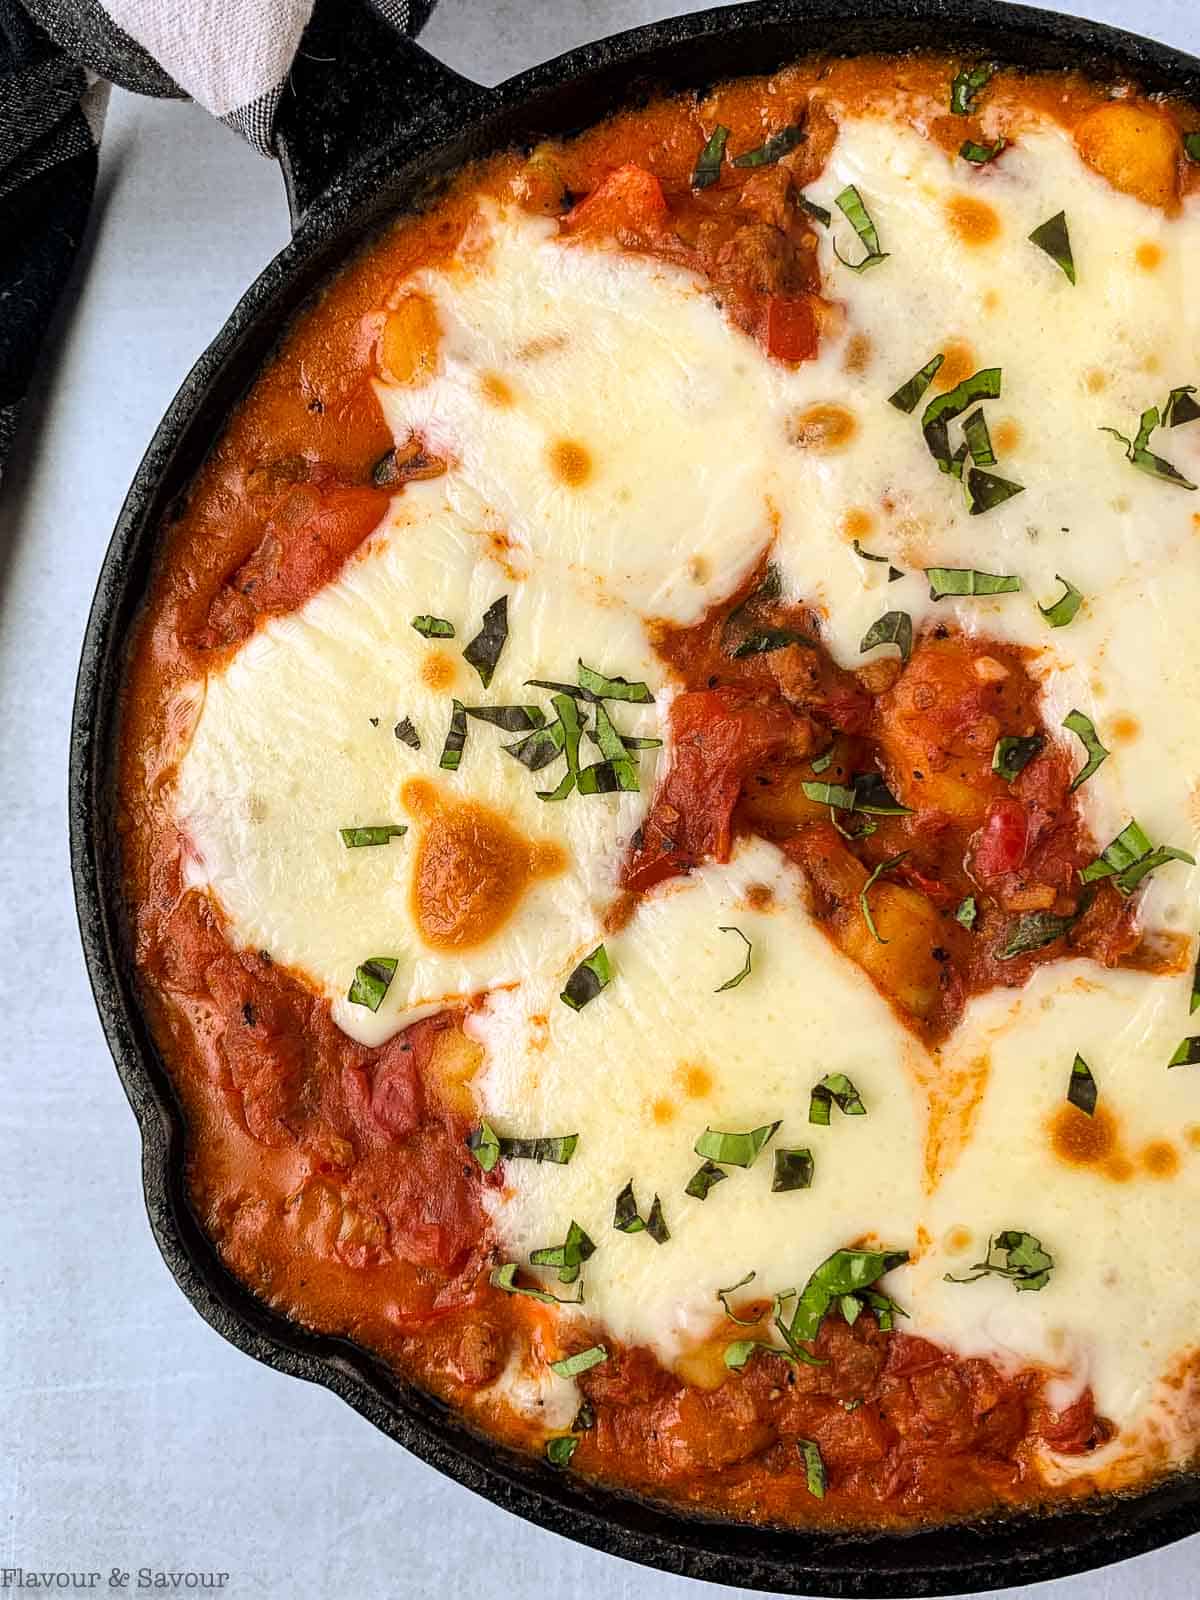 Cheese and tomato gnocchi bake in a cast iron skillet.